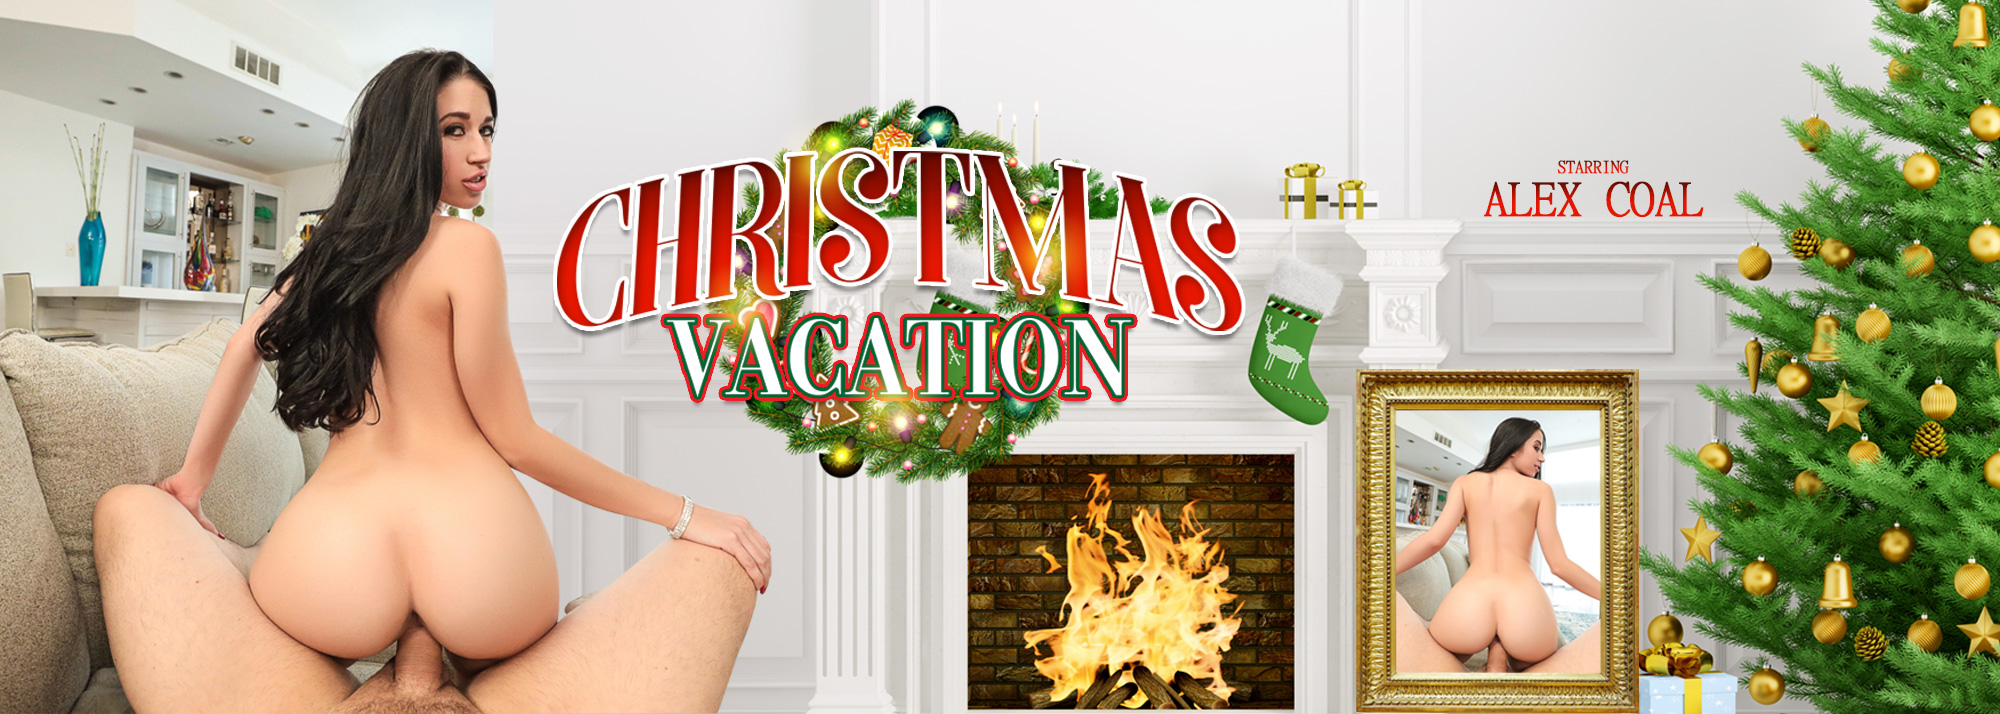 Christmas Vacation - VR Porn Video, Starring: Alex Coal